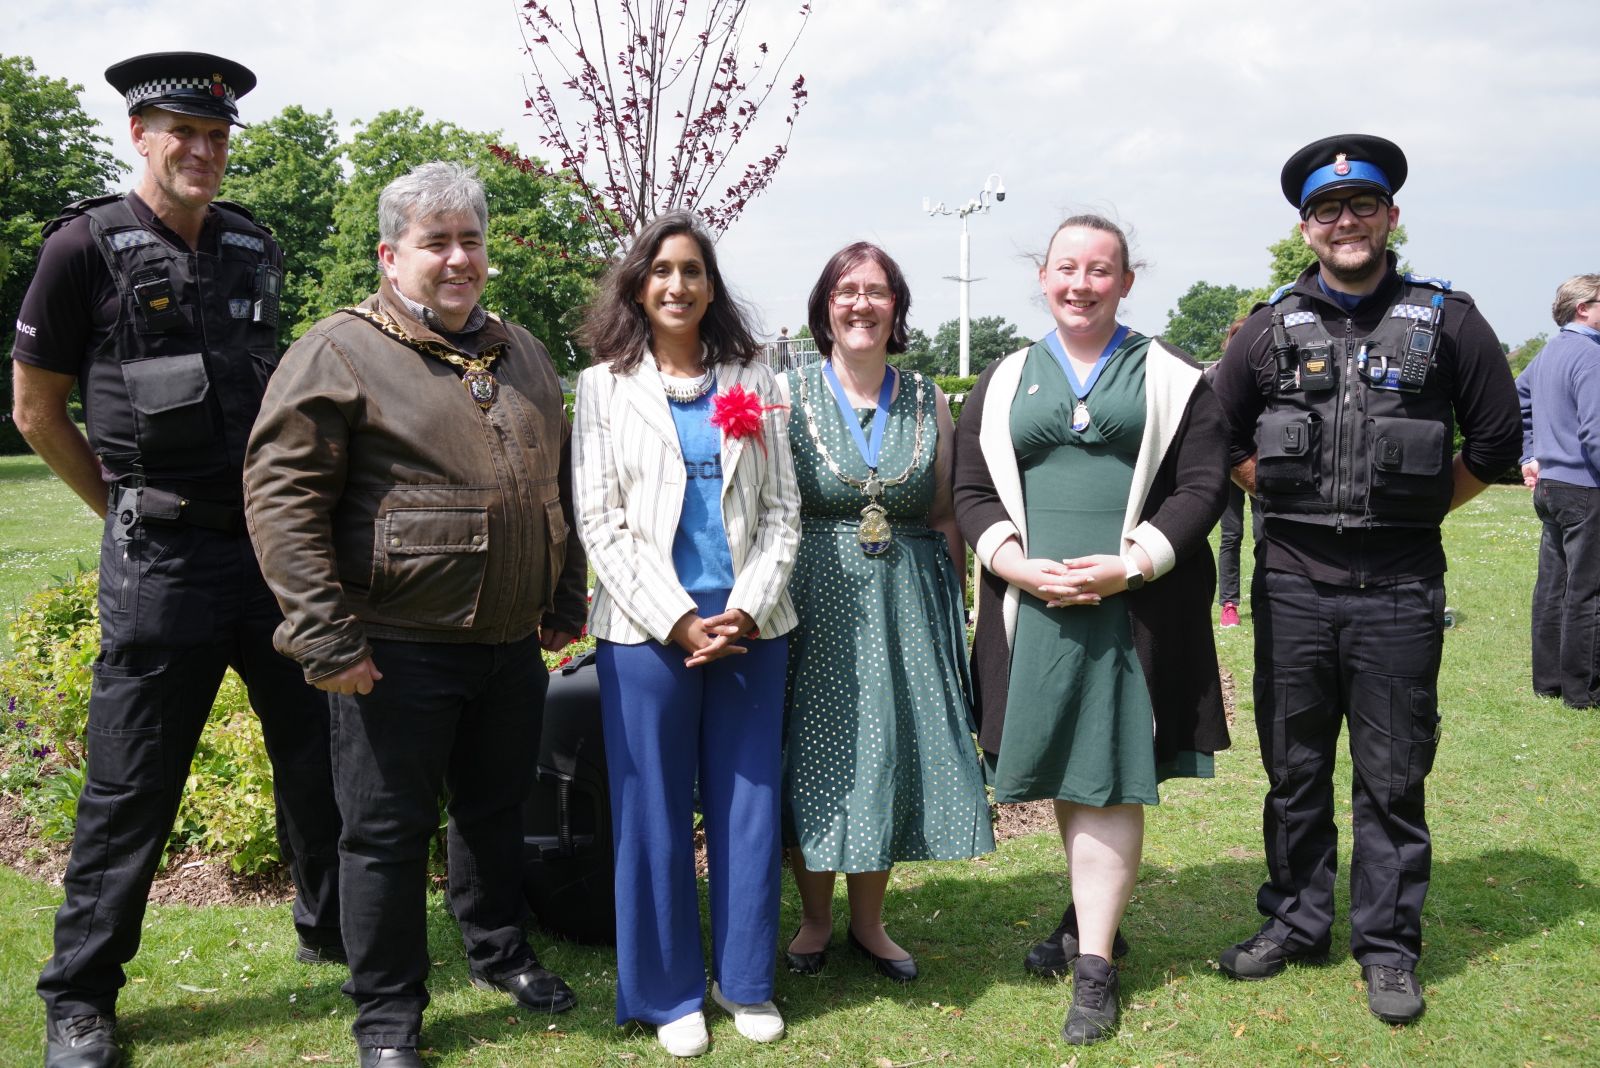 Left to right: Surrey Police Officer, Councillor Frank Kelly, MP Claire Coutinho, Councillor Samantha Marshall, Councillor Hannah Avery, Surrey Police Officer